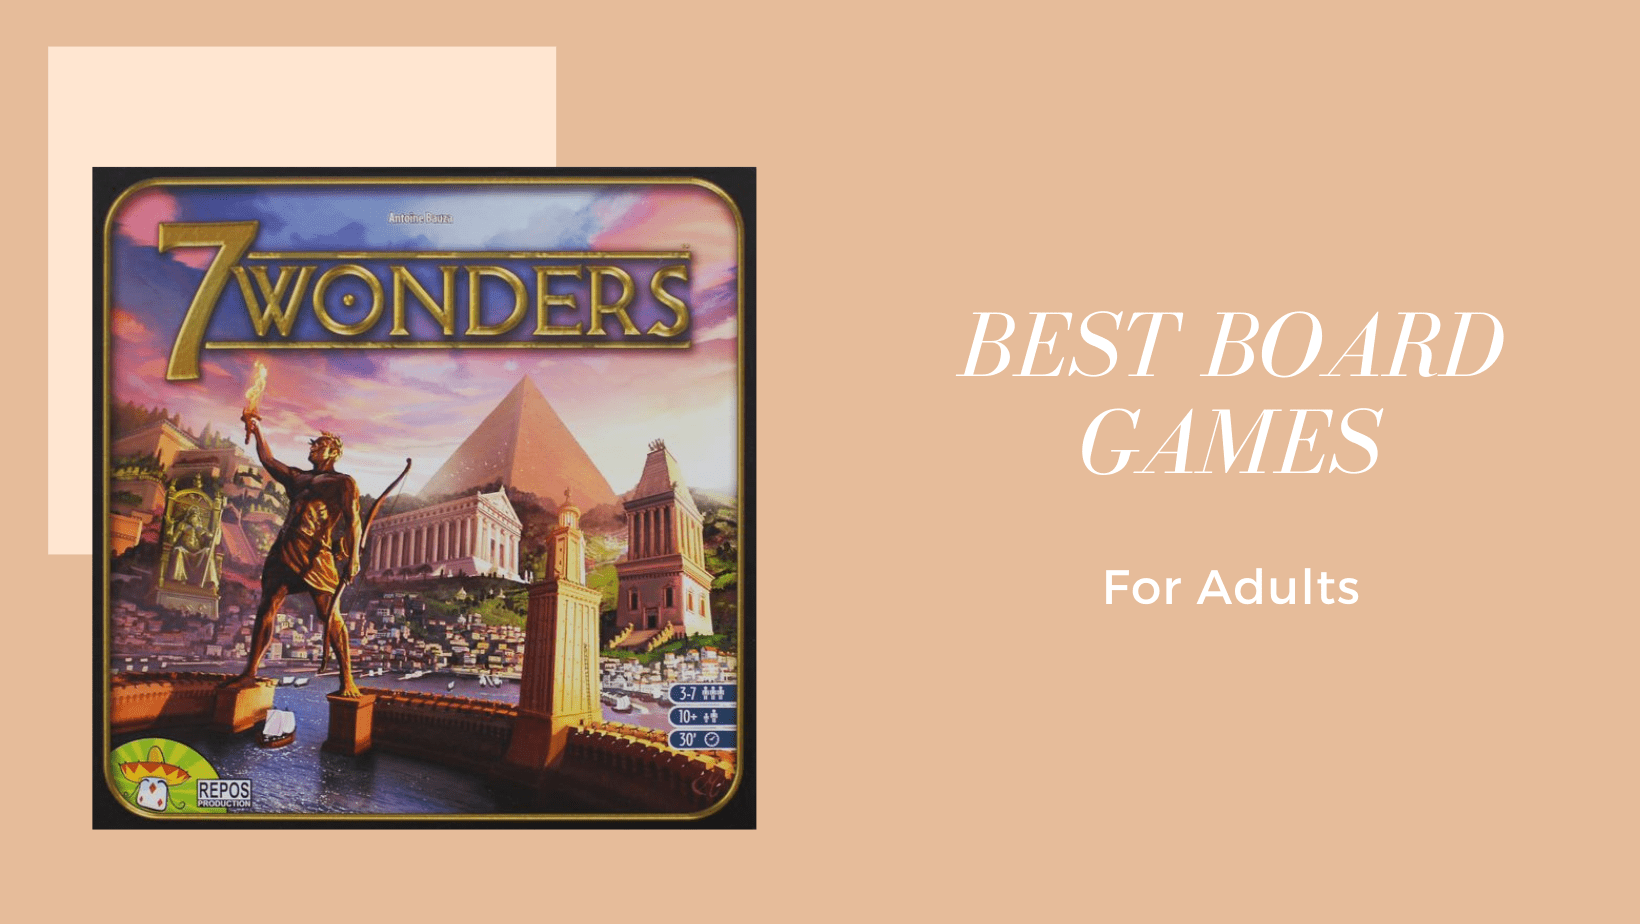 The board game Seven Wonders as one of the best board games for adults.